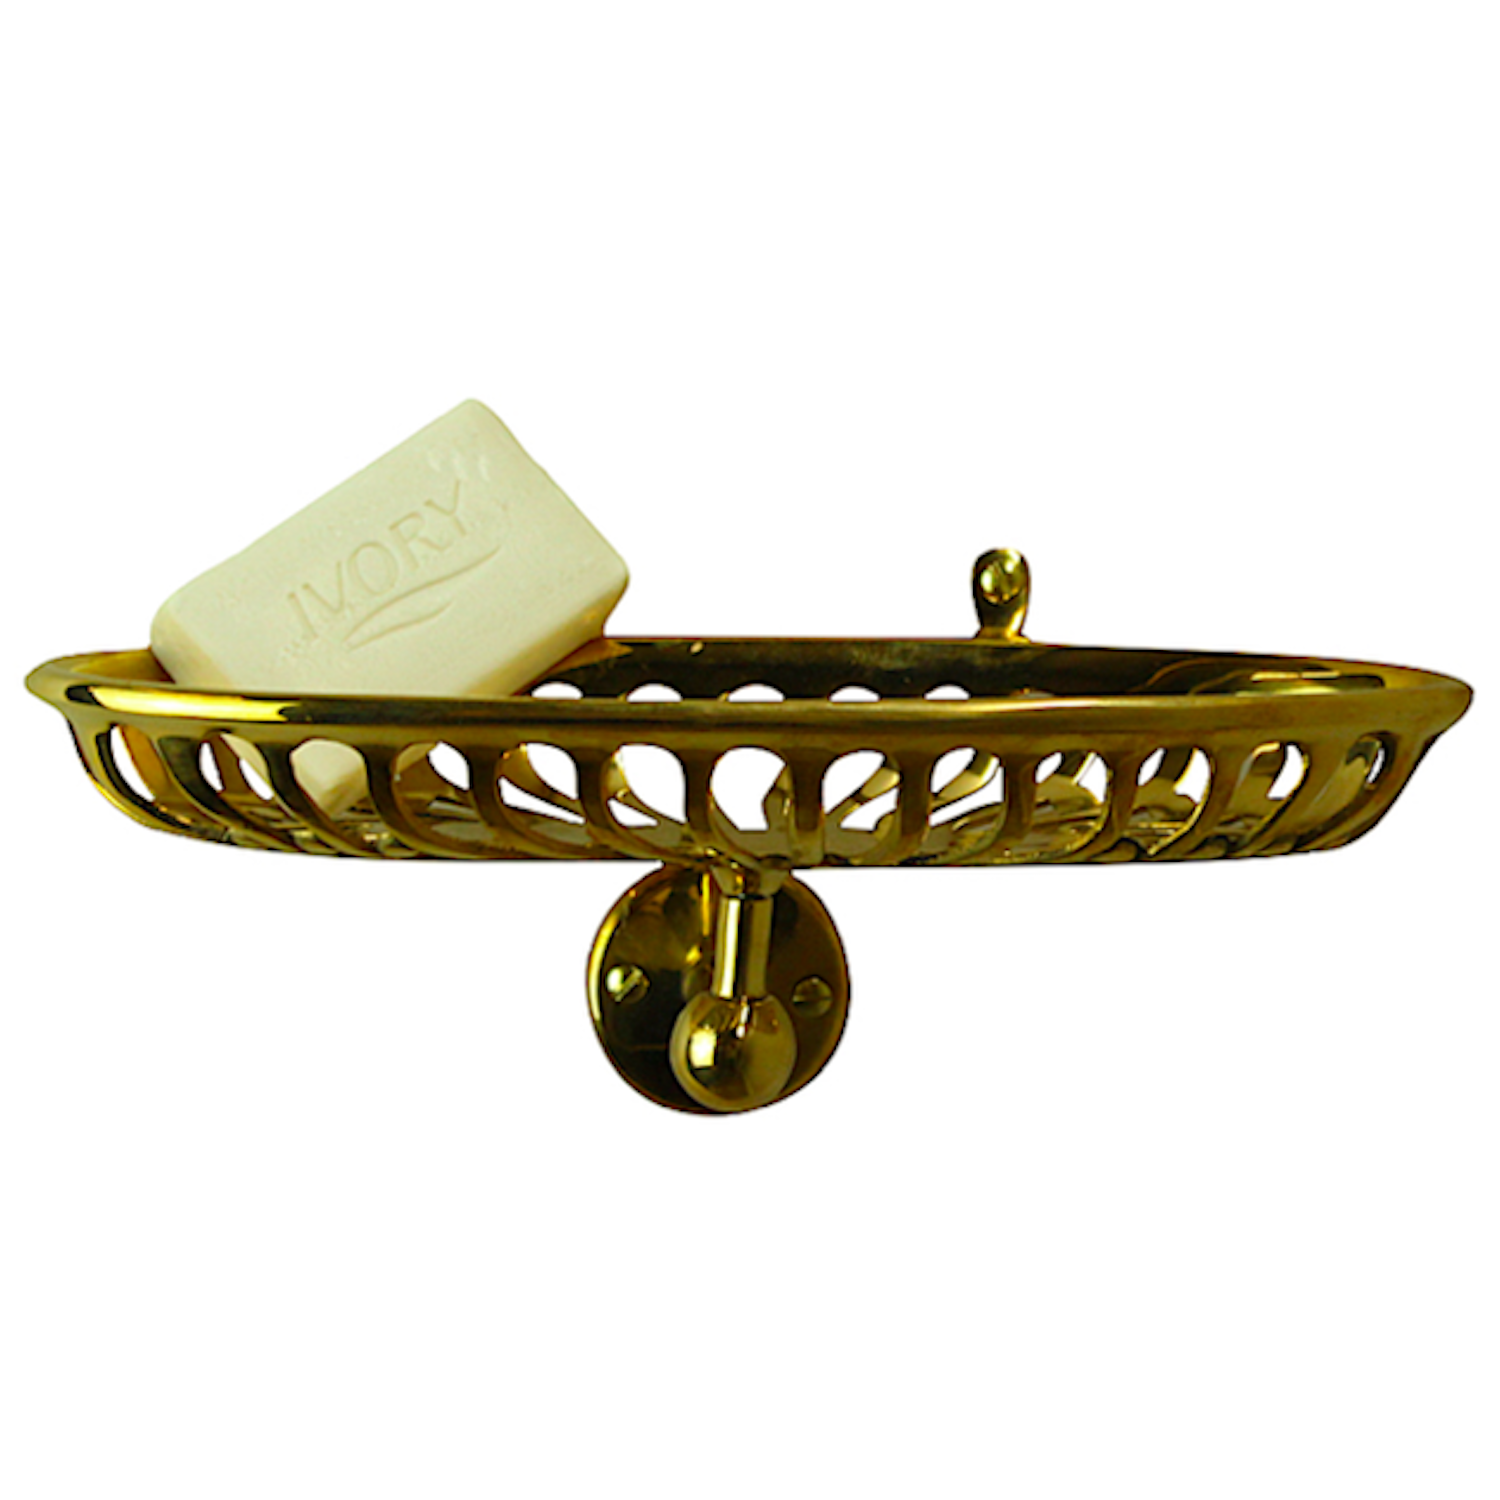 Wall Mounted Antique Brass Bathroom Soap Dish Holder Soap Basket Gba409